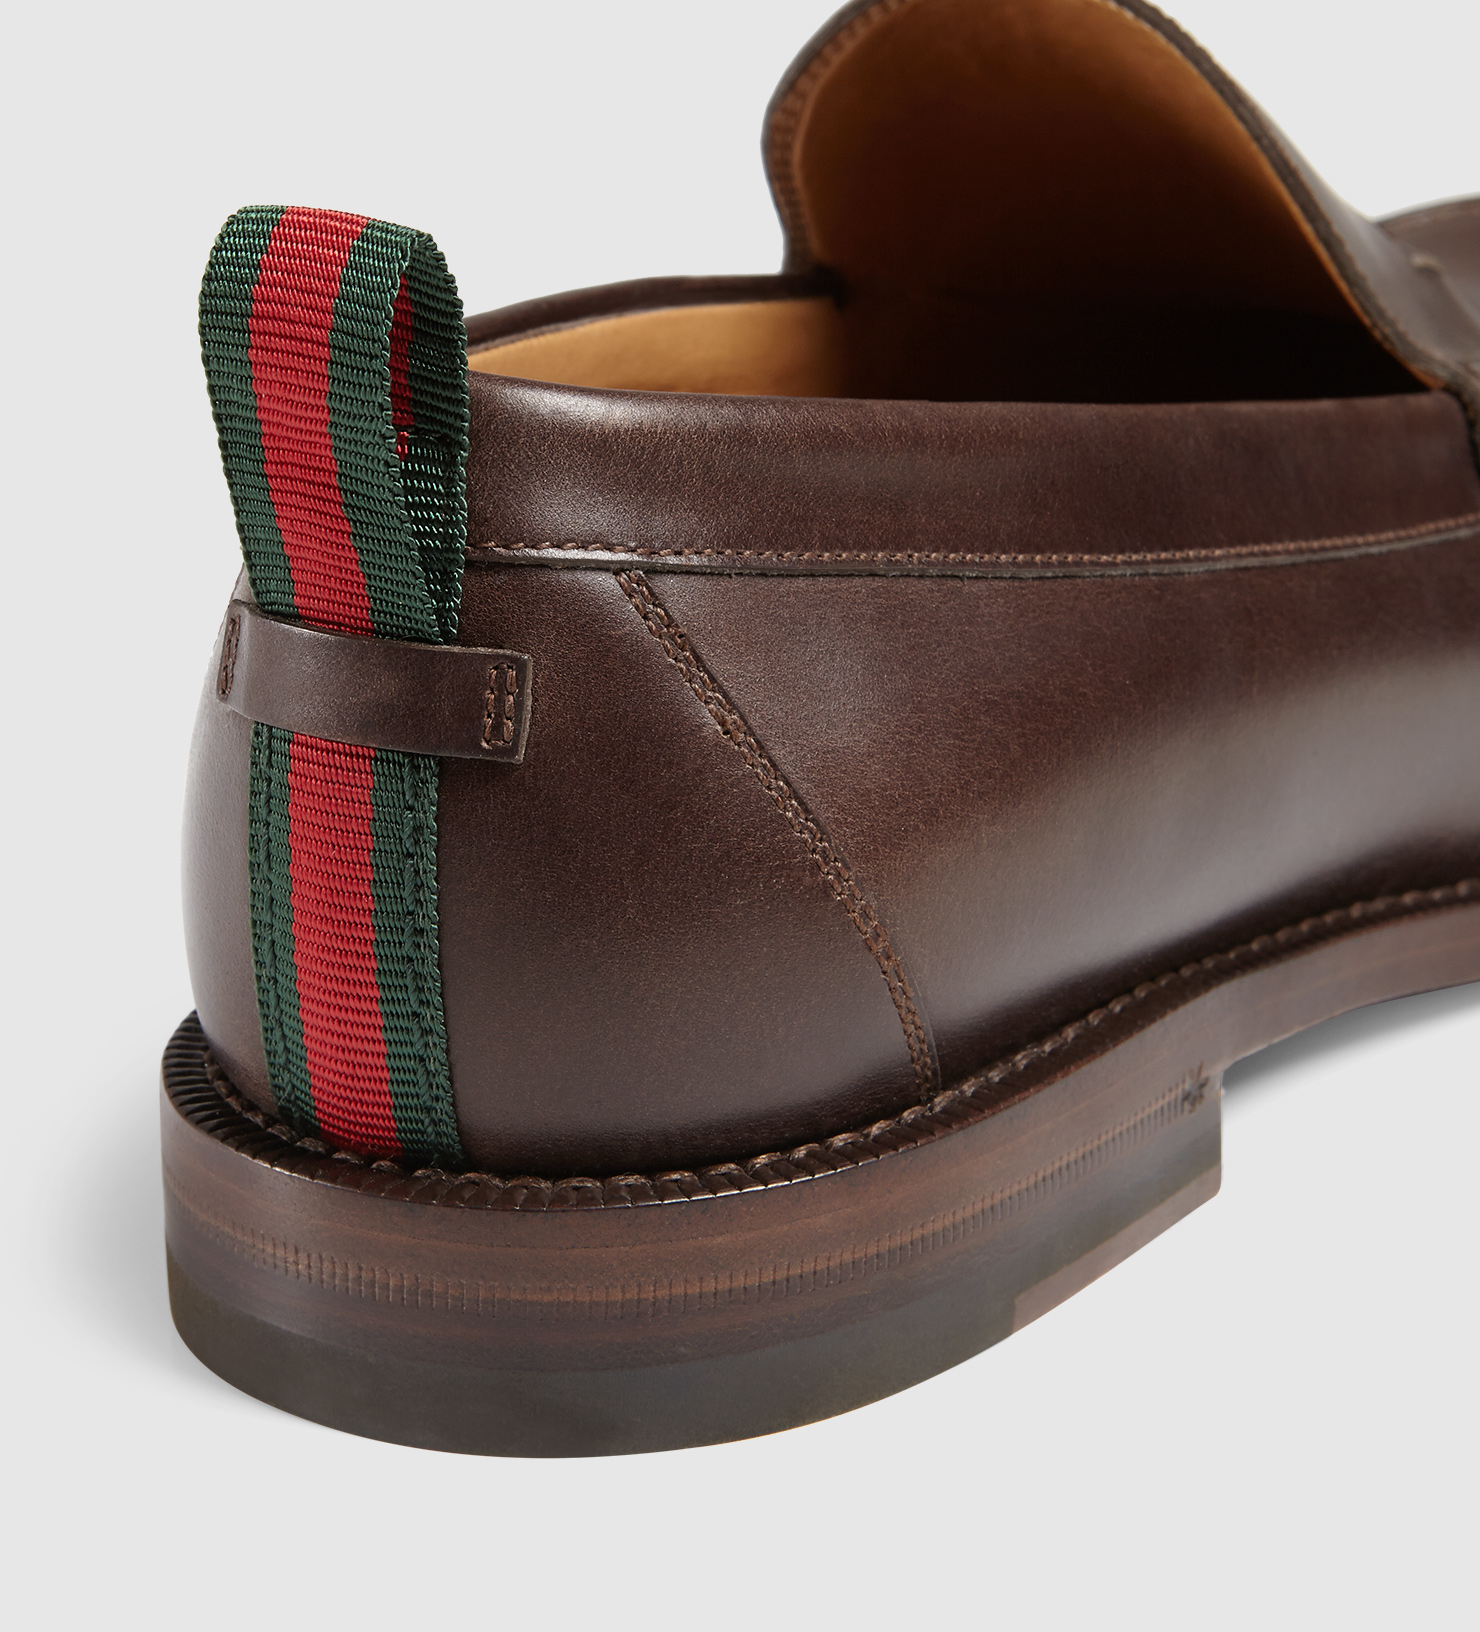 Gucci Leather Loafer in Brown for Men - Lyst